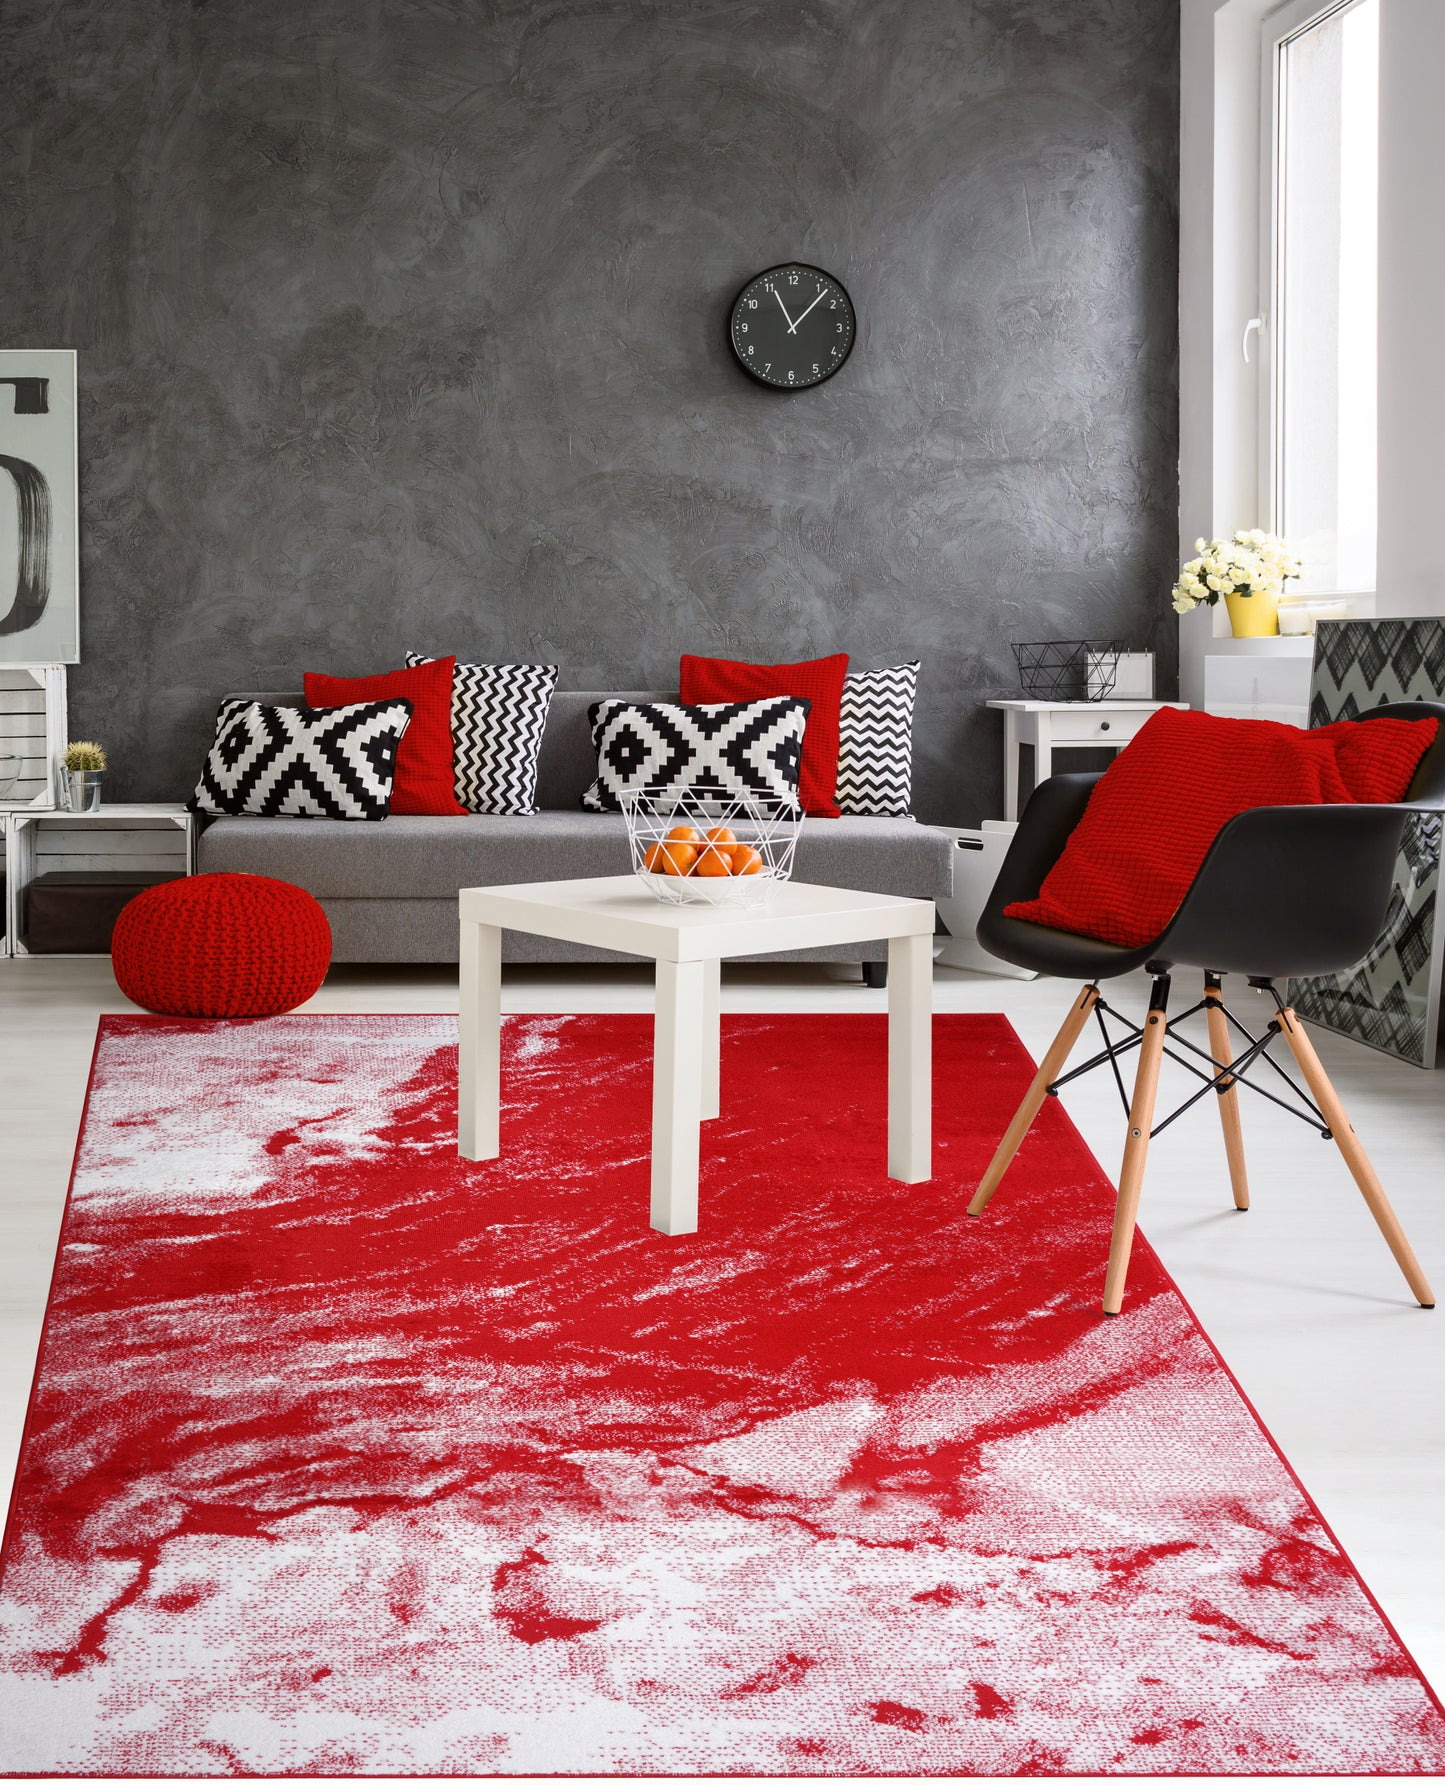 calvin red black abstract area rug 2x5, 3x5 Runner Rug, Entry Way, Entrance, Balcony, Bedside, Home Office, Table Top